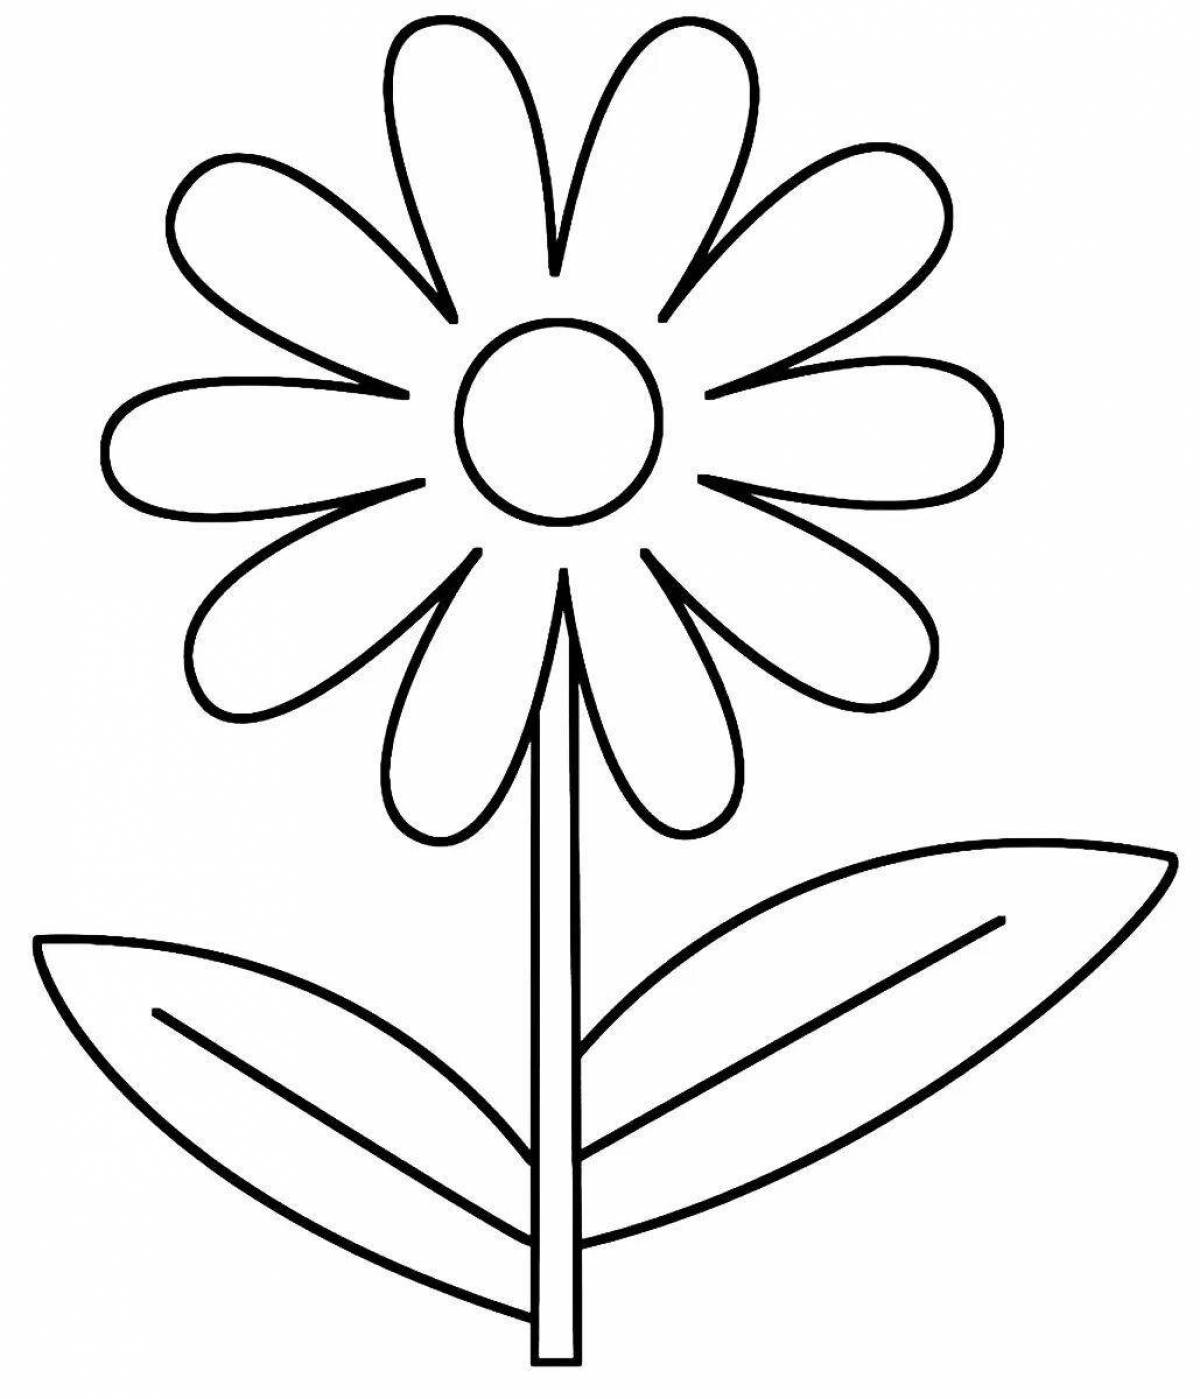 Colorful daisy flower coloring page